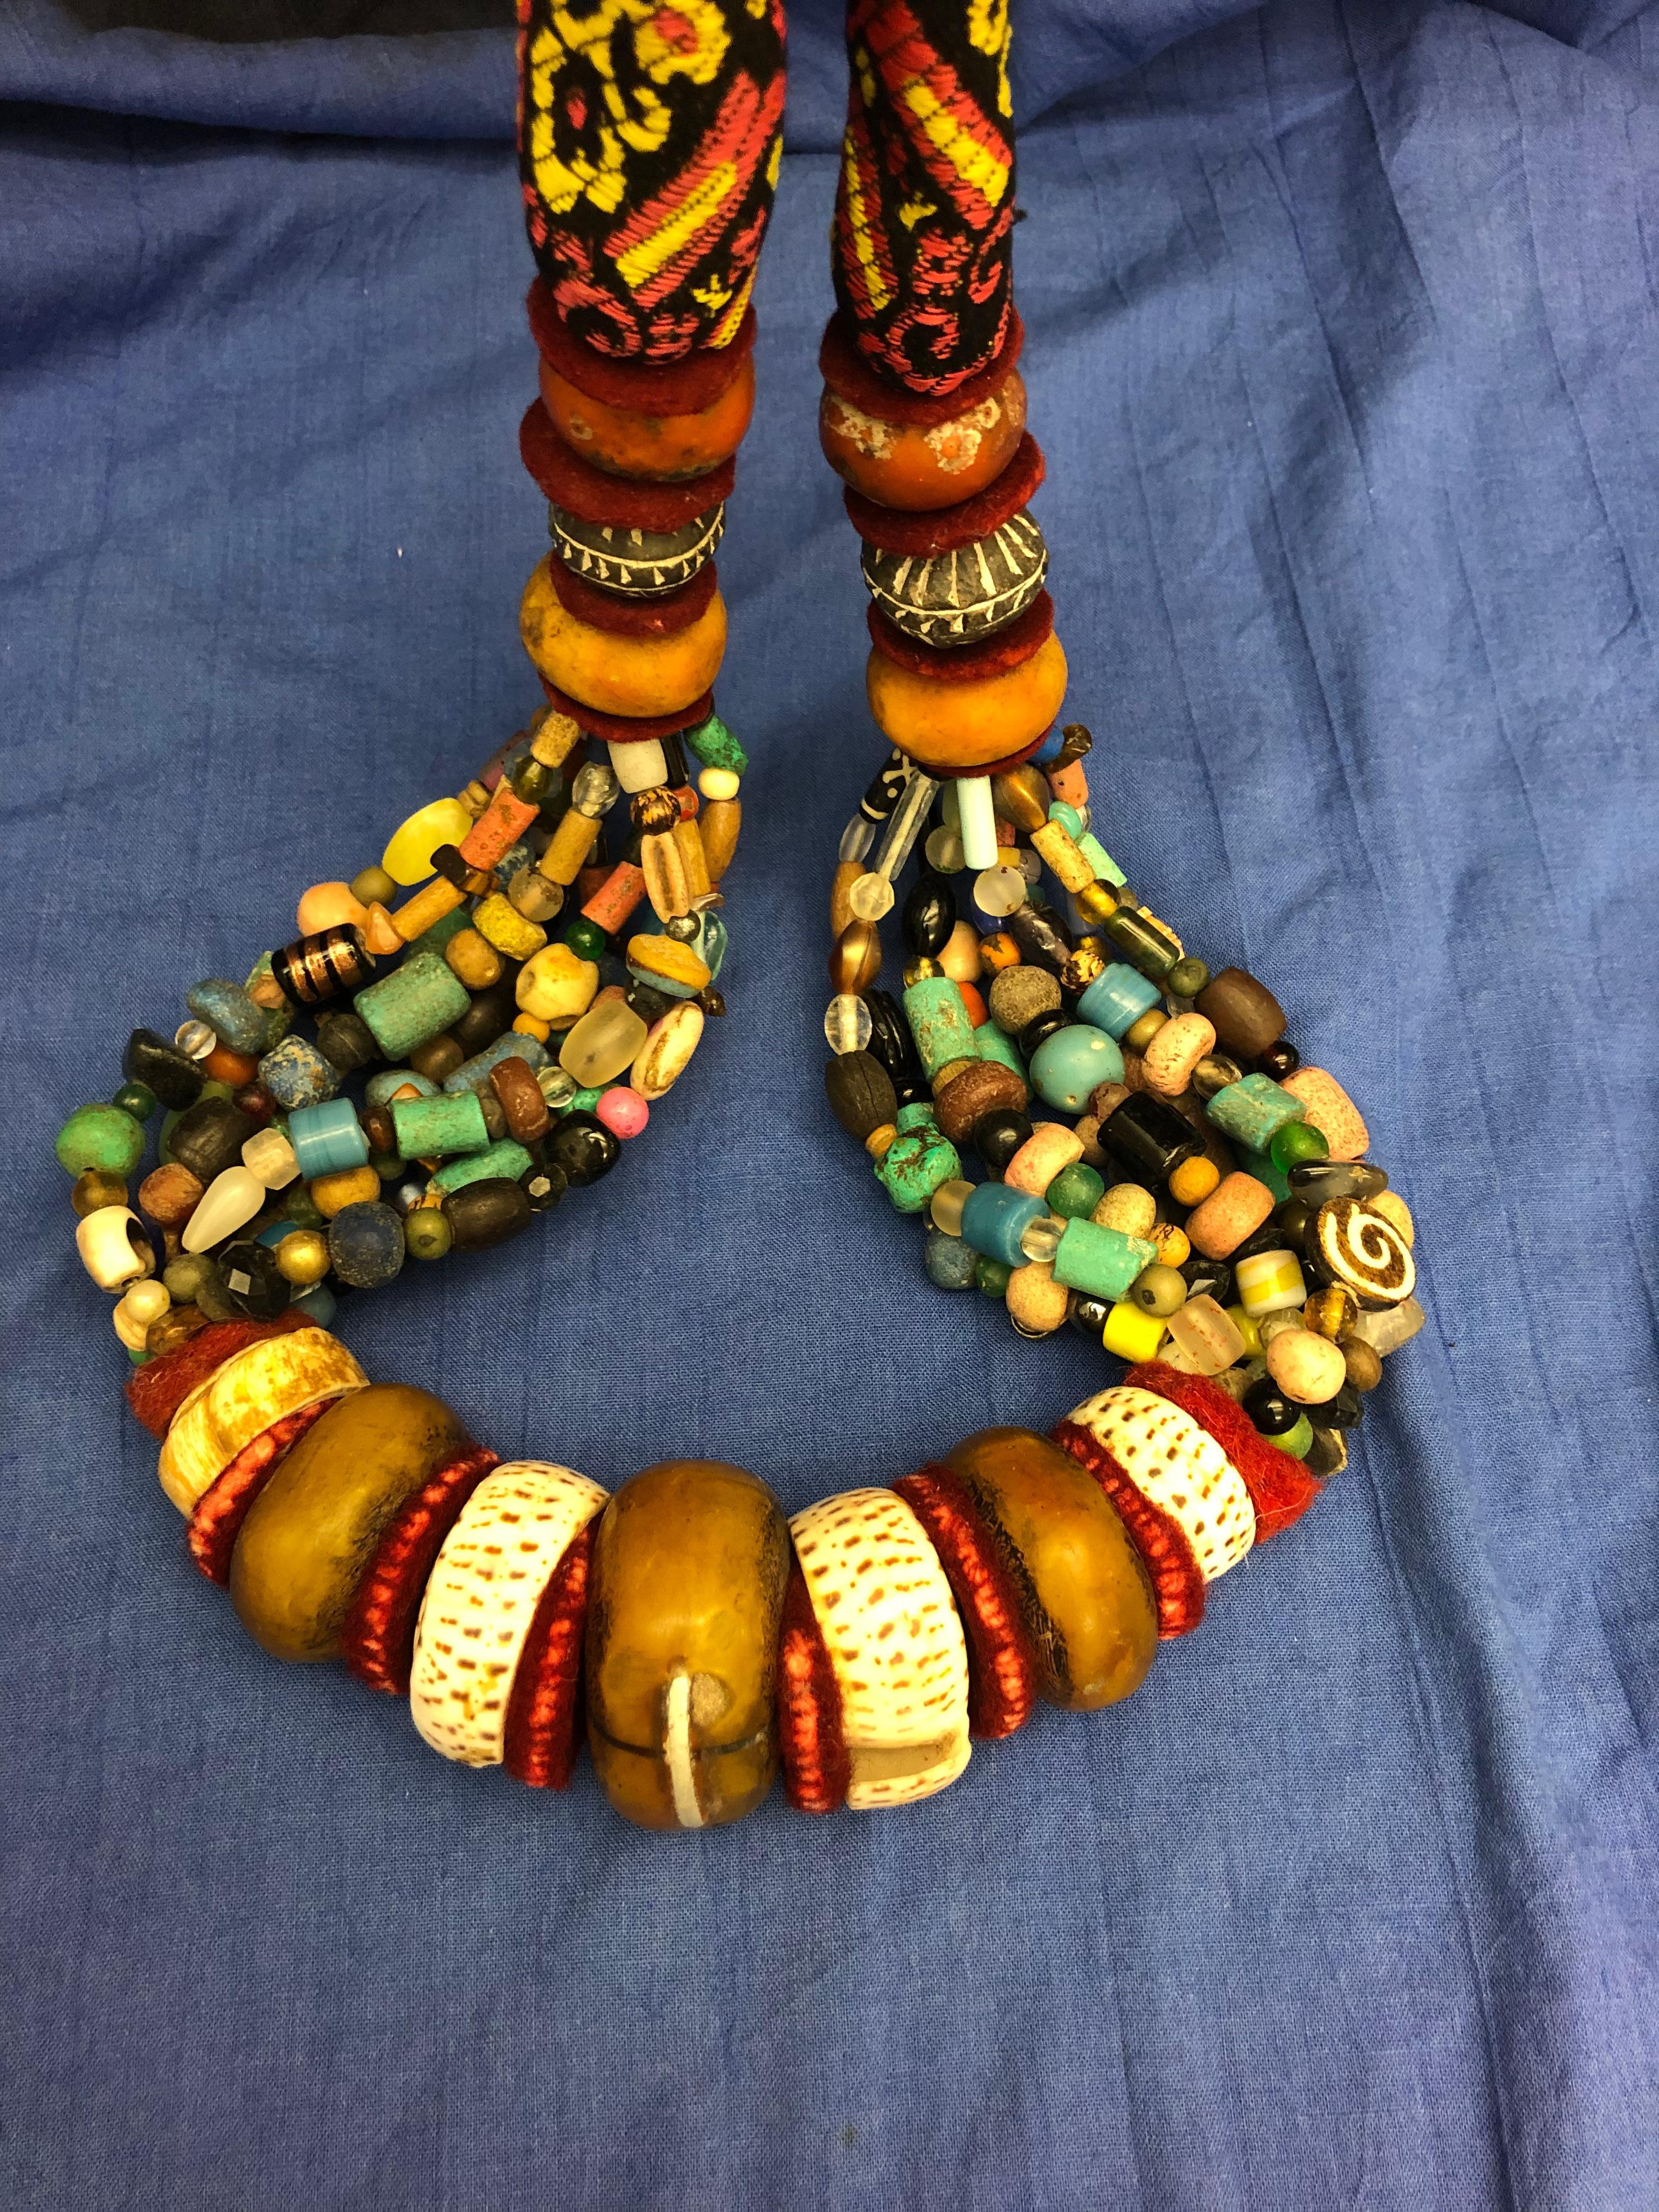 This giant handmade Berber necklace is intended to be worn during tribal wedding celebrations or to be displayed on the wall. The centre of the necklace has a very large copal bead that has been repaired with a large silver staple. Two snail shells